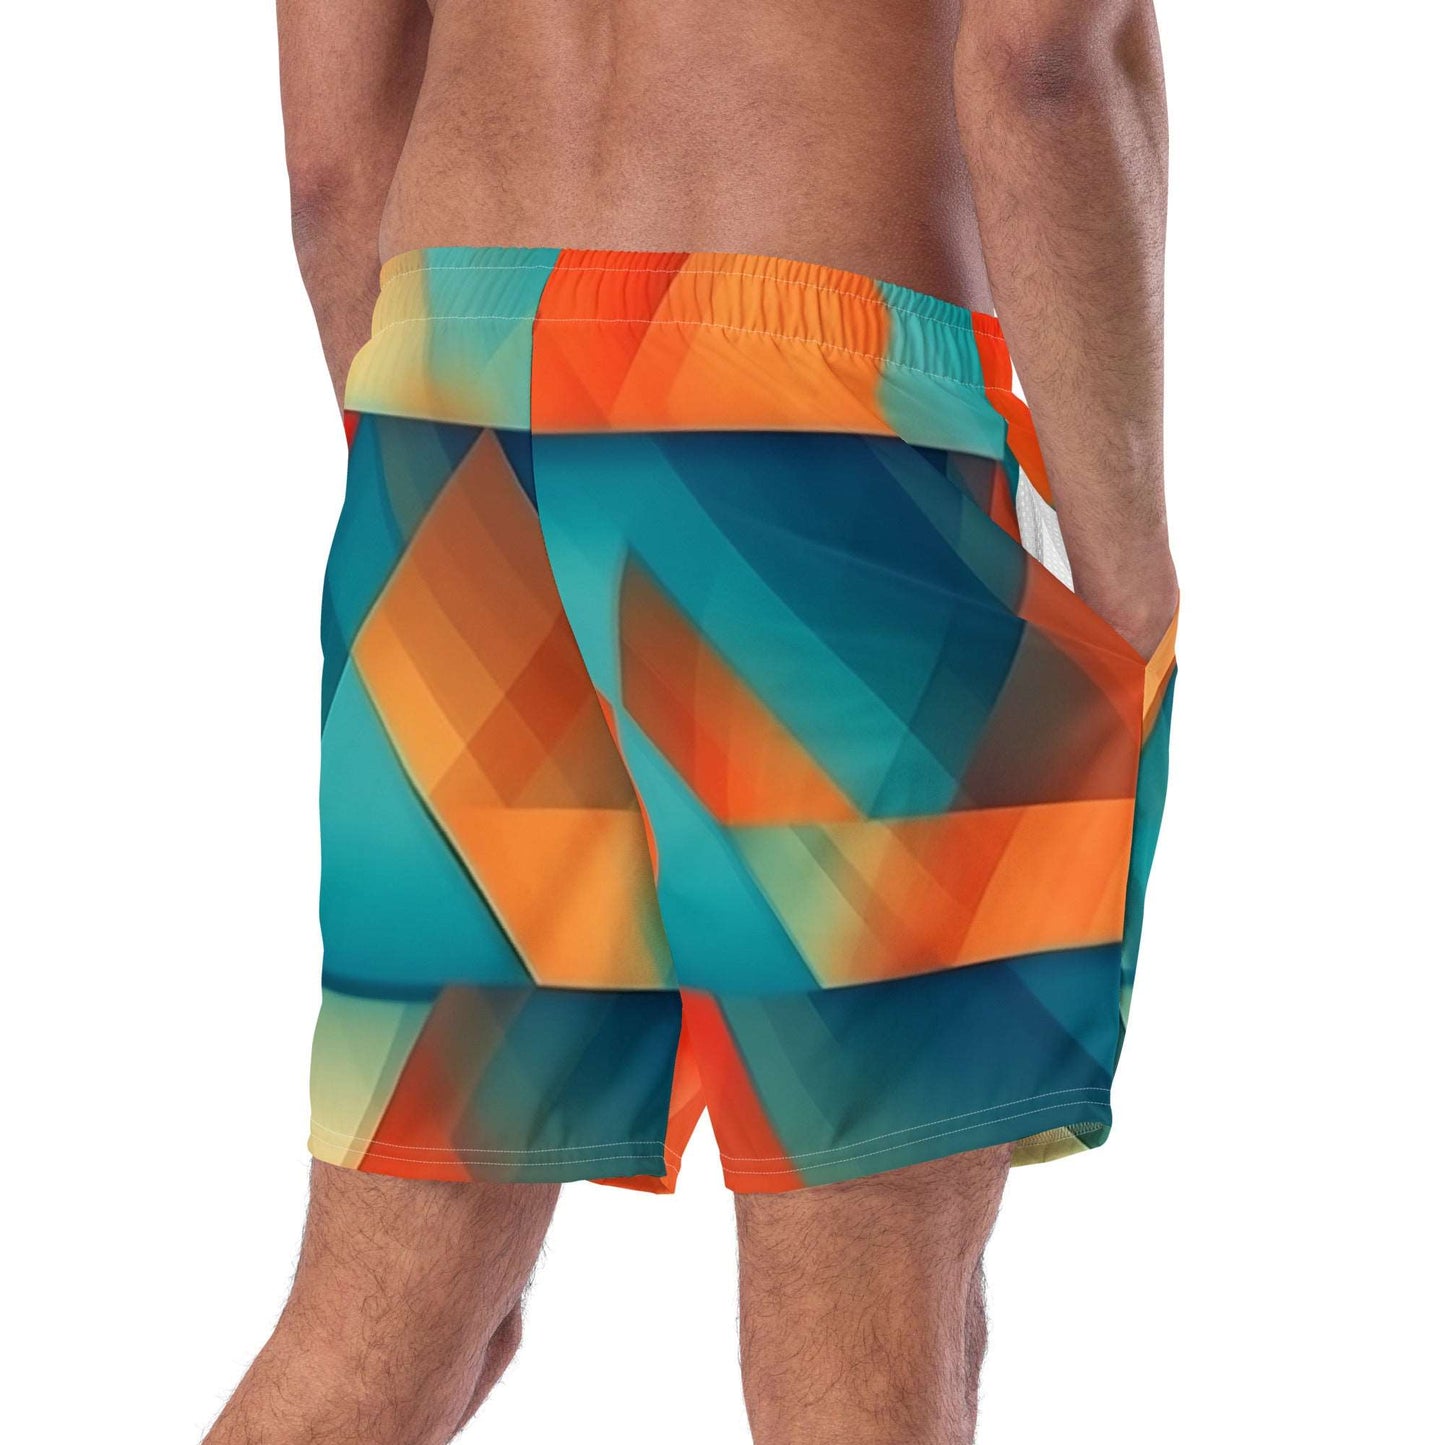 man back with prism swim shorts by B.Different Clothing independent streetwear inspired by street art graffiti